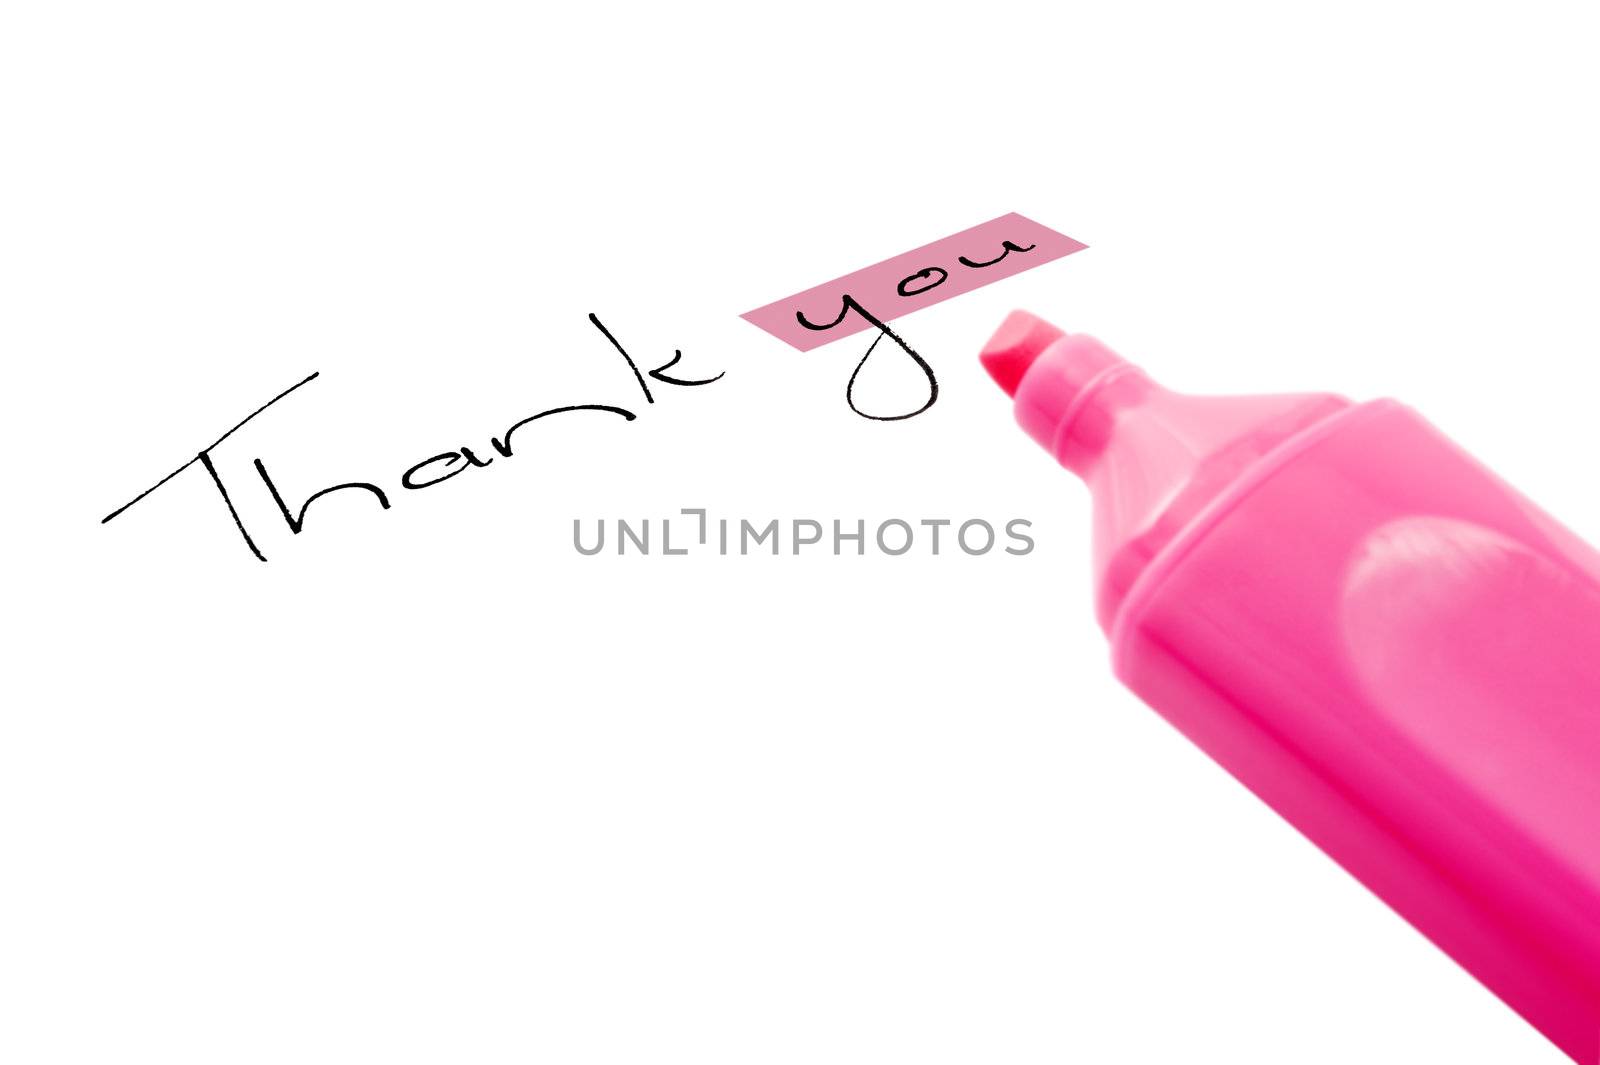 Thank you with hightlighter pen by tish1